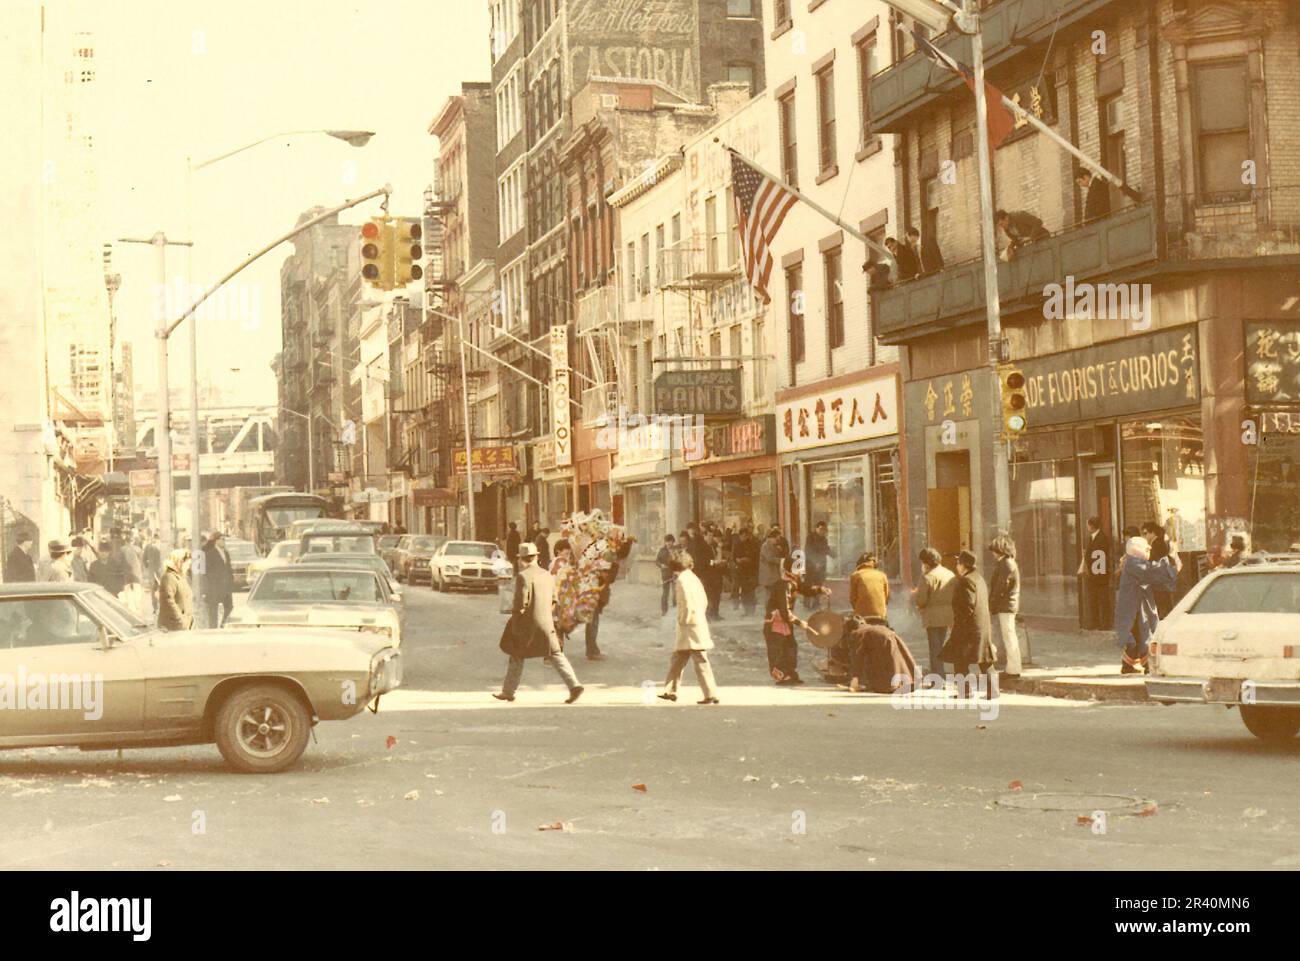 Vintage image of Chinese New Year celebrations in New York's Chinatown in 1972 Stock Photo